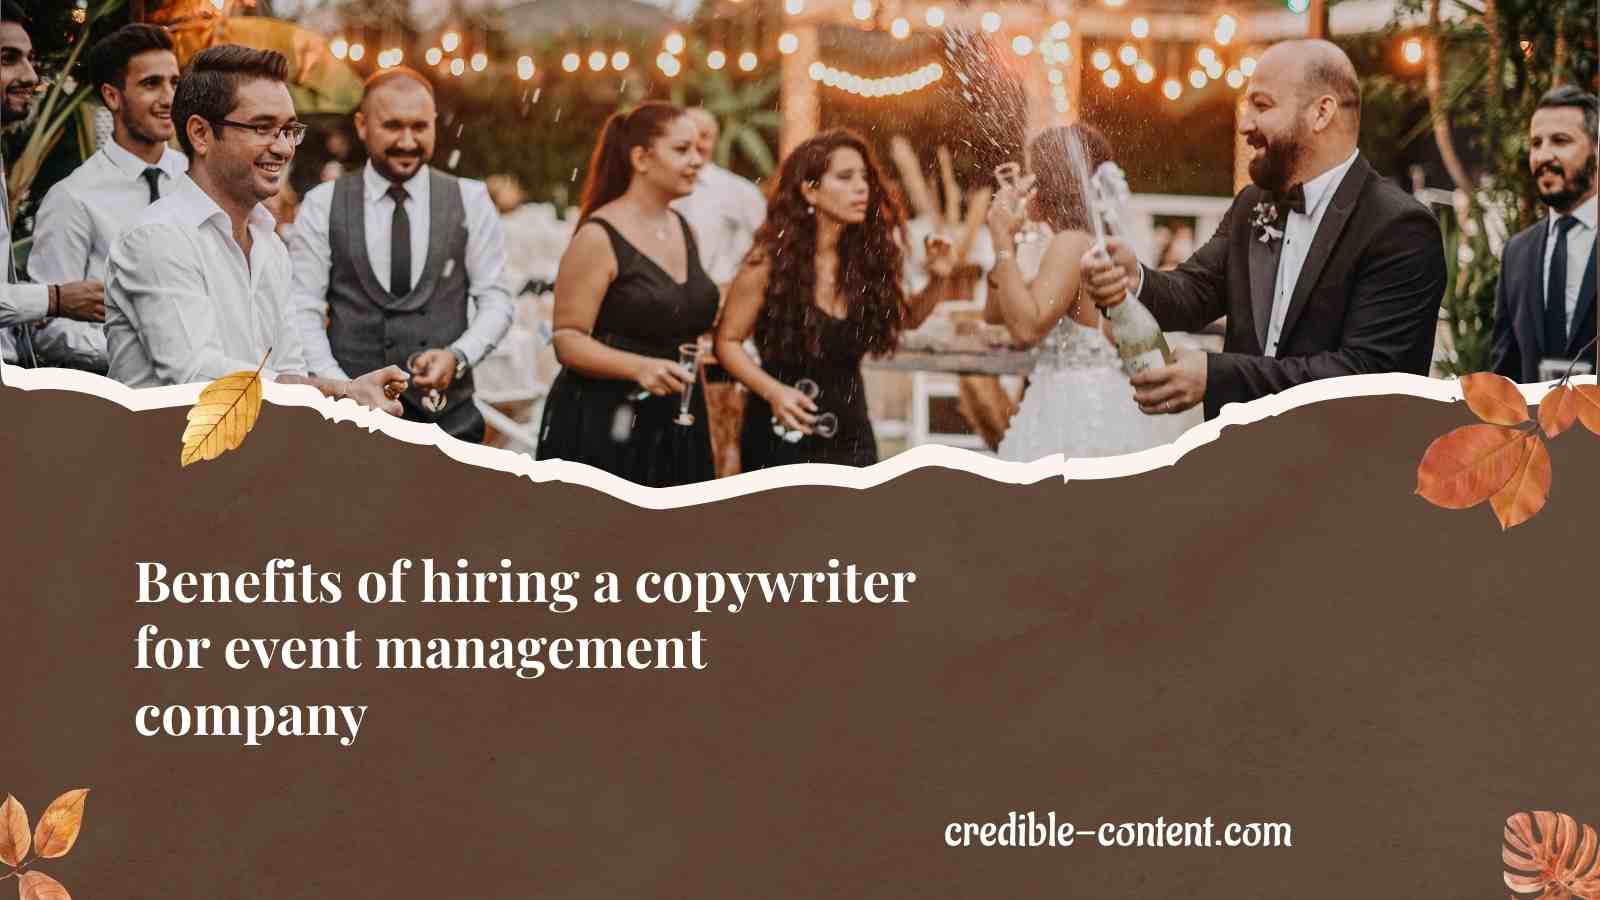 Benefits of hiring a copywriter for event management company